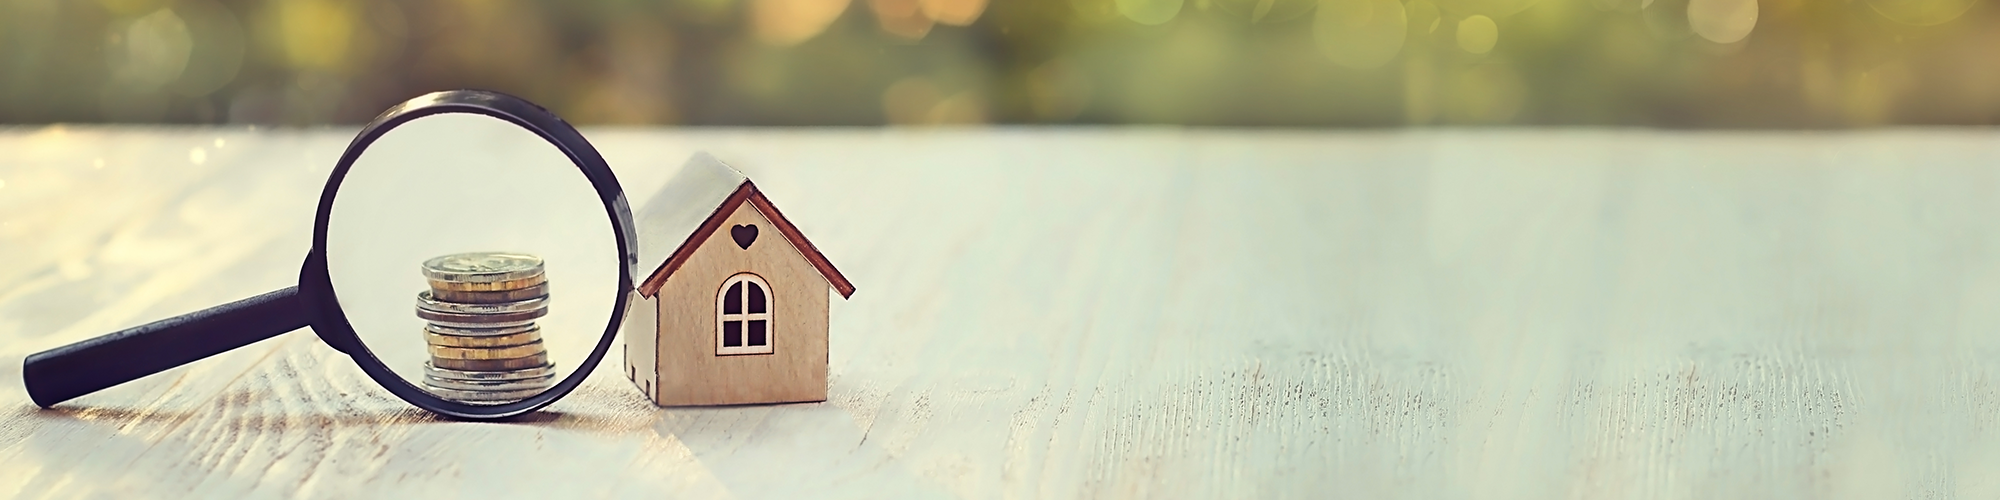 Applying for a mortgage? 3 things you can't have on your bank statement - From SAM Conveyancing. A looking glass scrutinises a stack of coins beside a wood-block toy house.